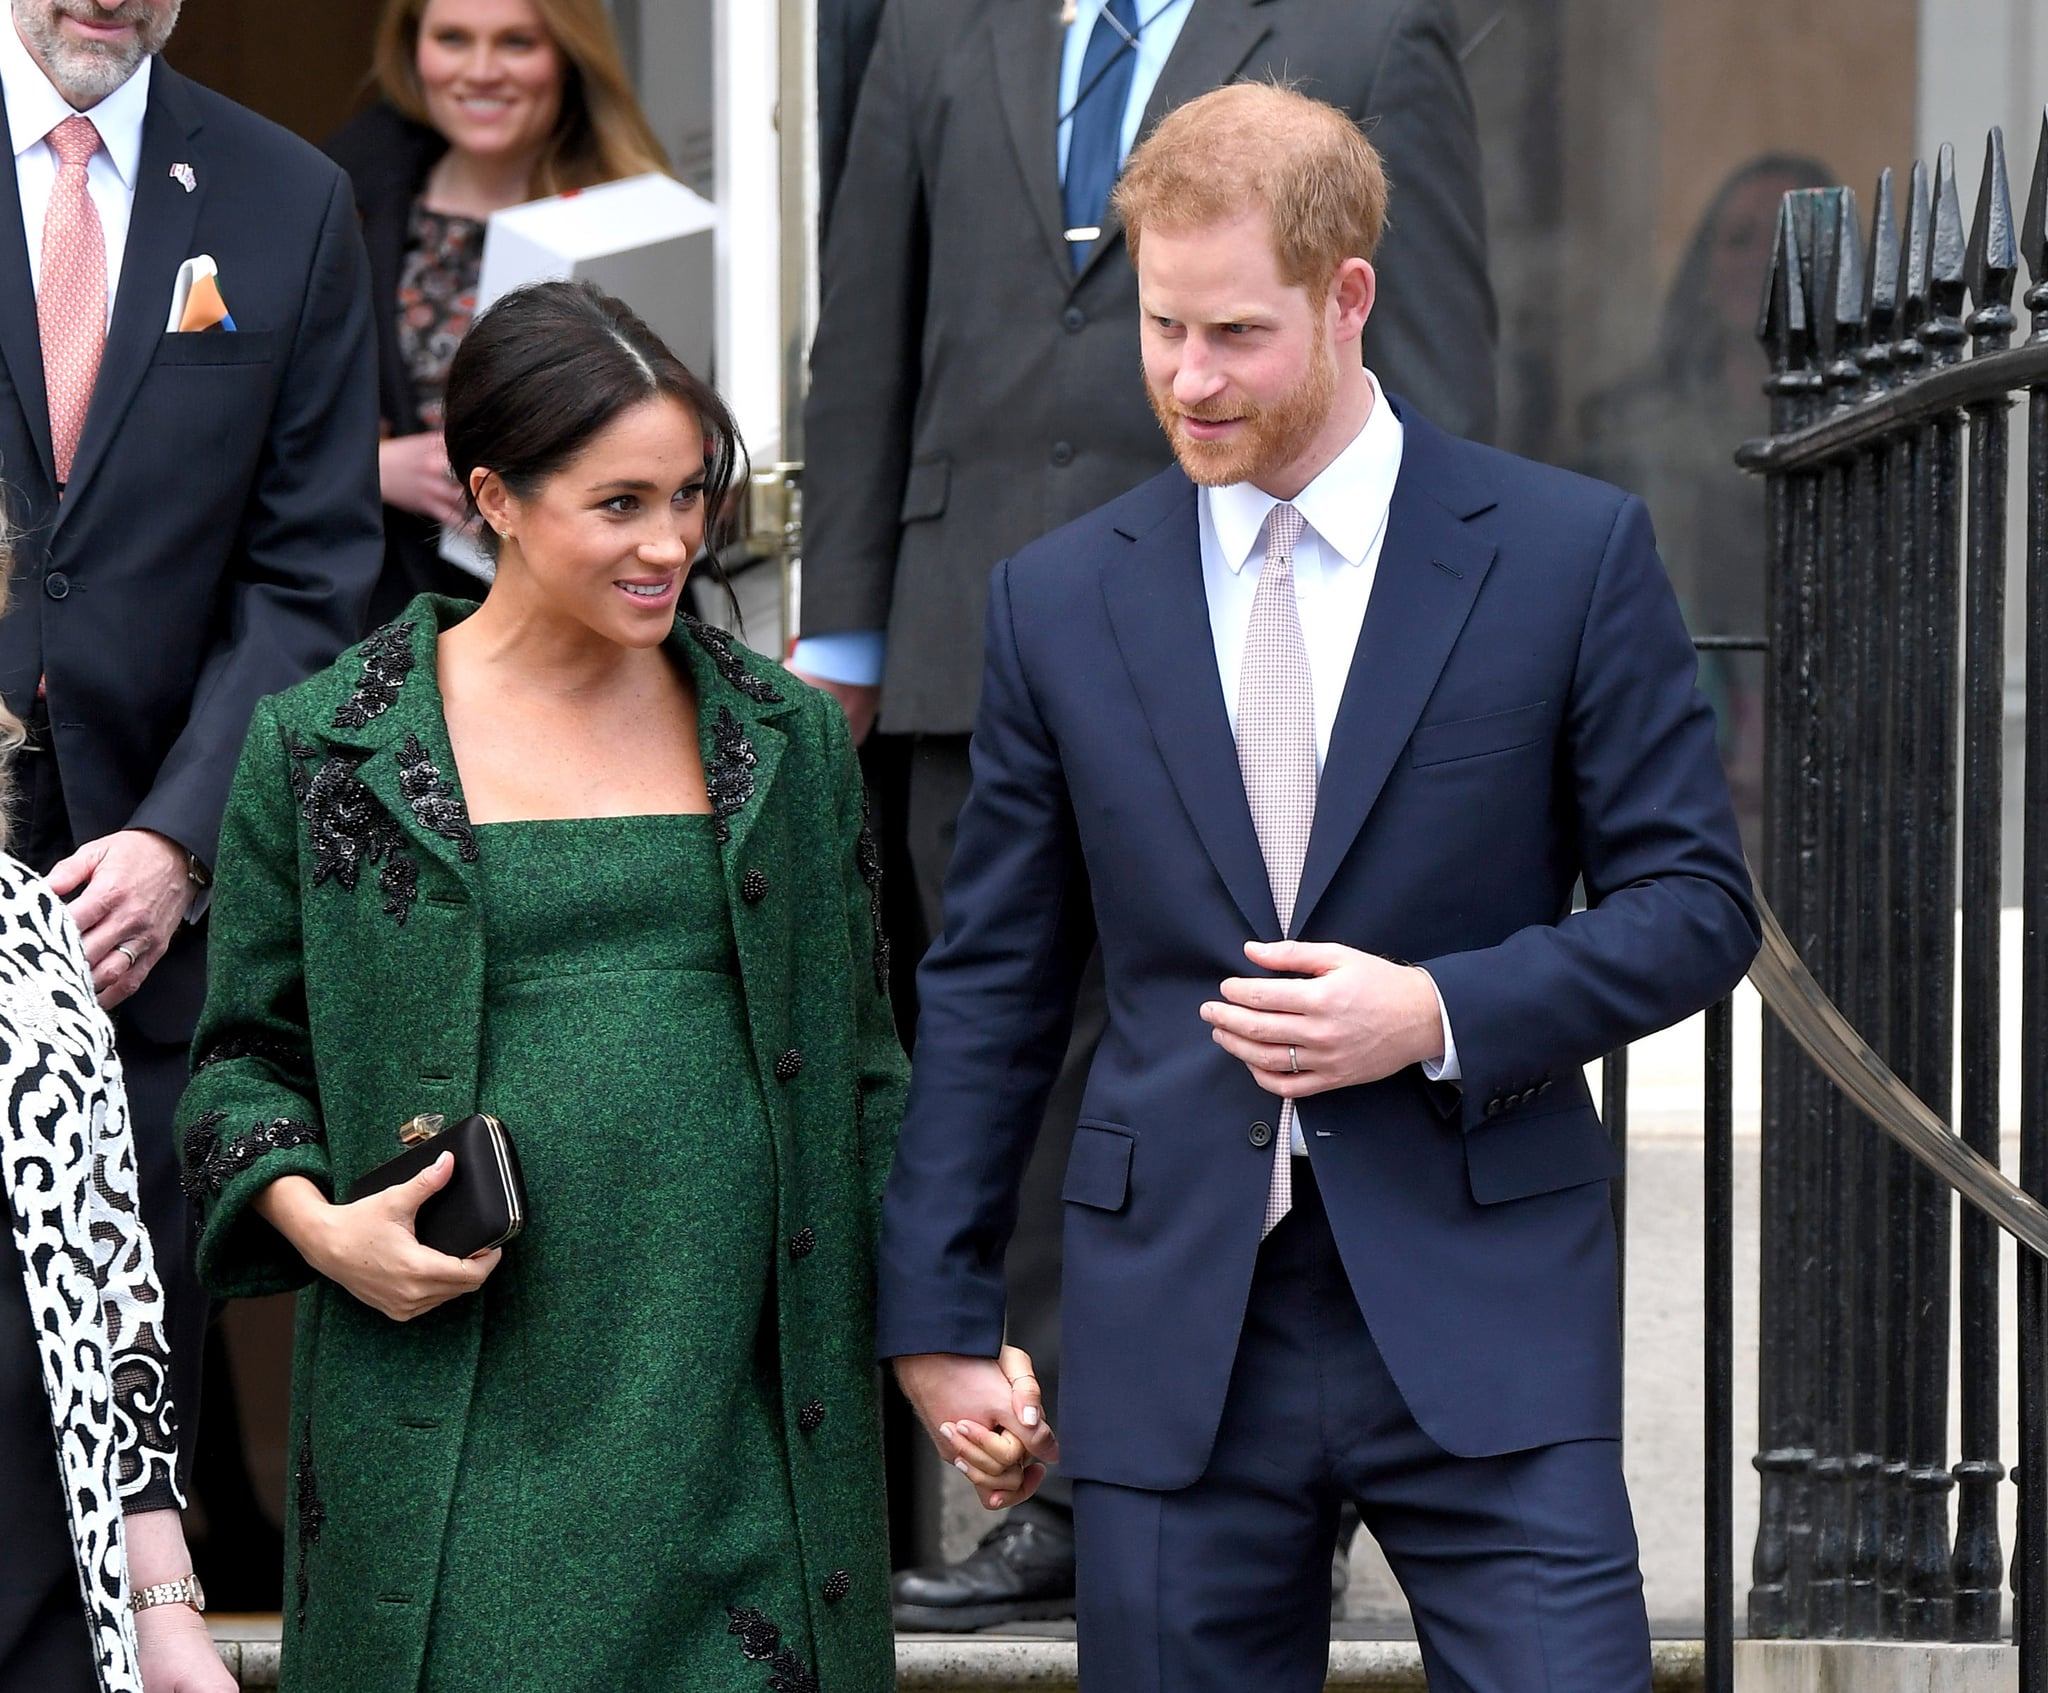 LONDON, ENGLAND - MARCH 11: Prince Harry, Duke of Sussex and Meghan, Duchess Of Sussex attend a Commonwealth Day Youth Event at Canada House on March 11, 2019 in London, England. The event will showcase and celebrate the diverse community of young Canadians living in London and around the UK. (Photo by Karwai Tang/WireImage)